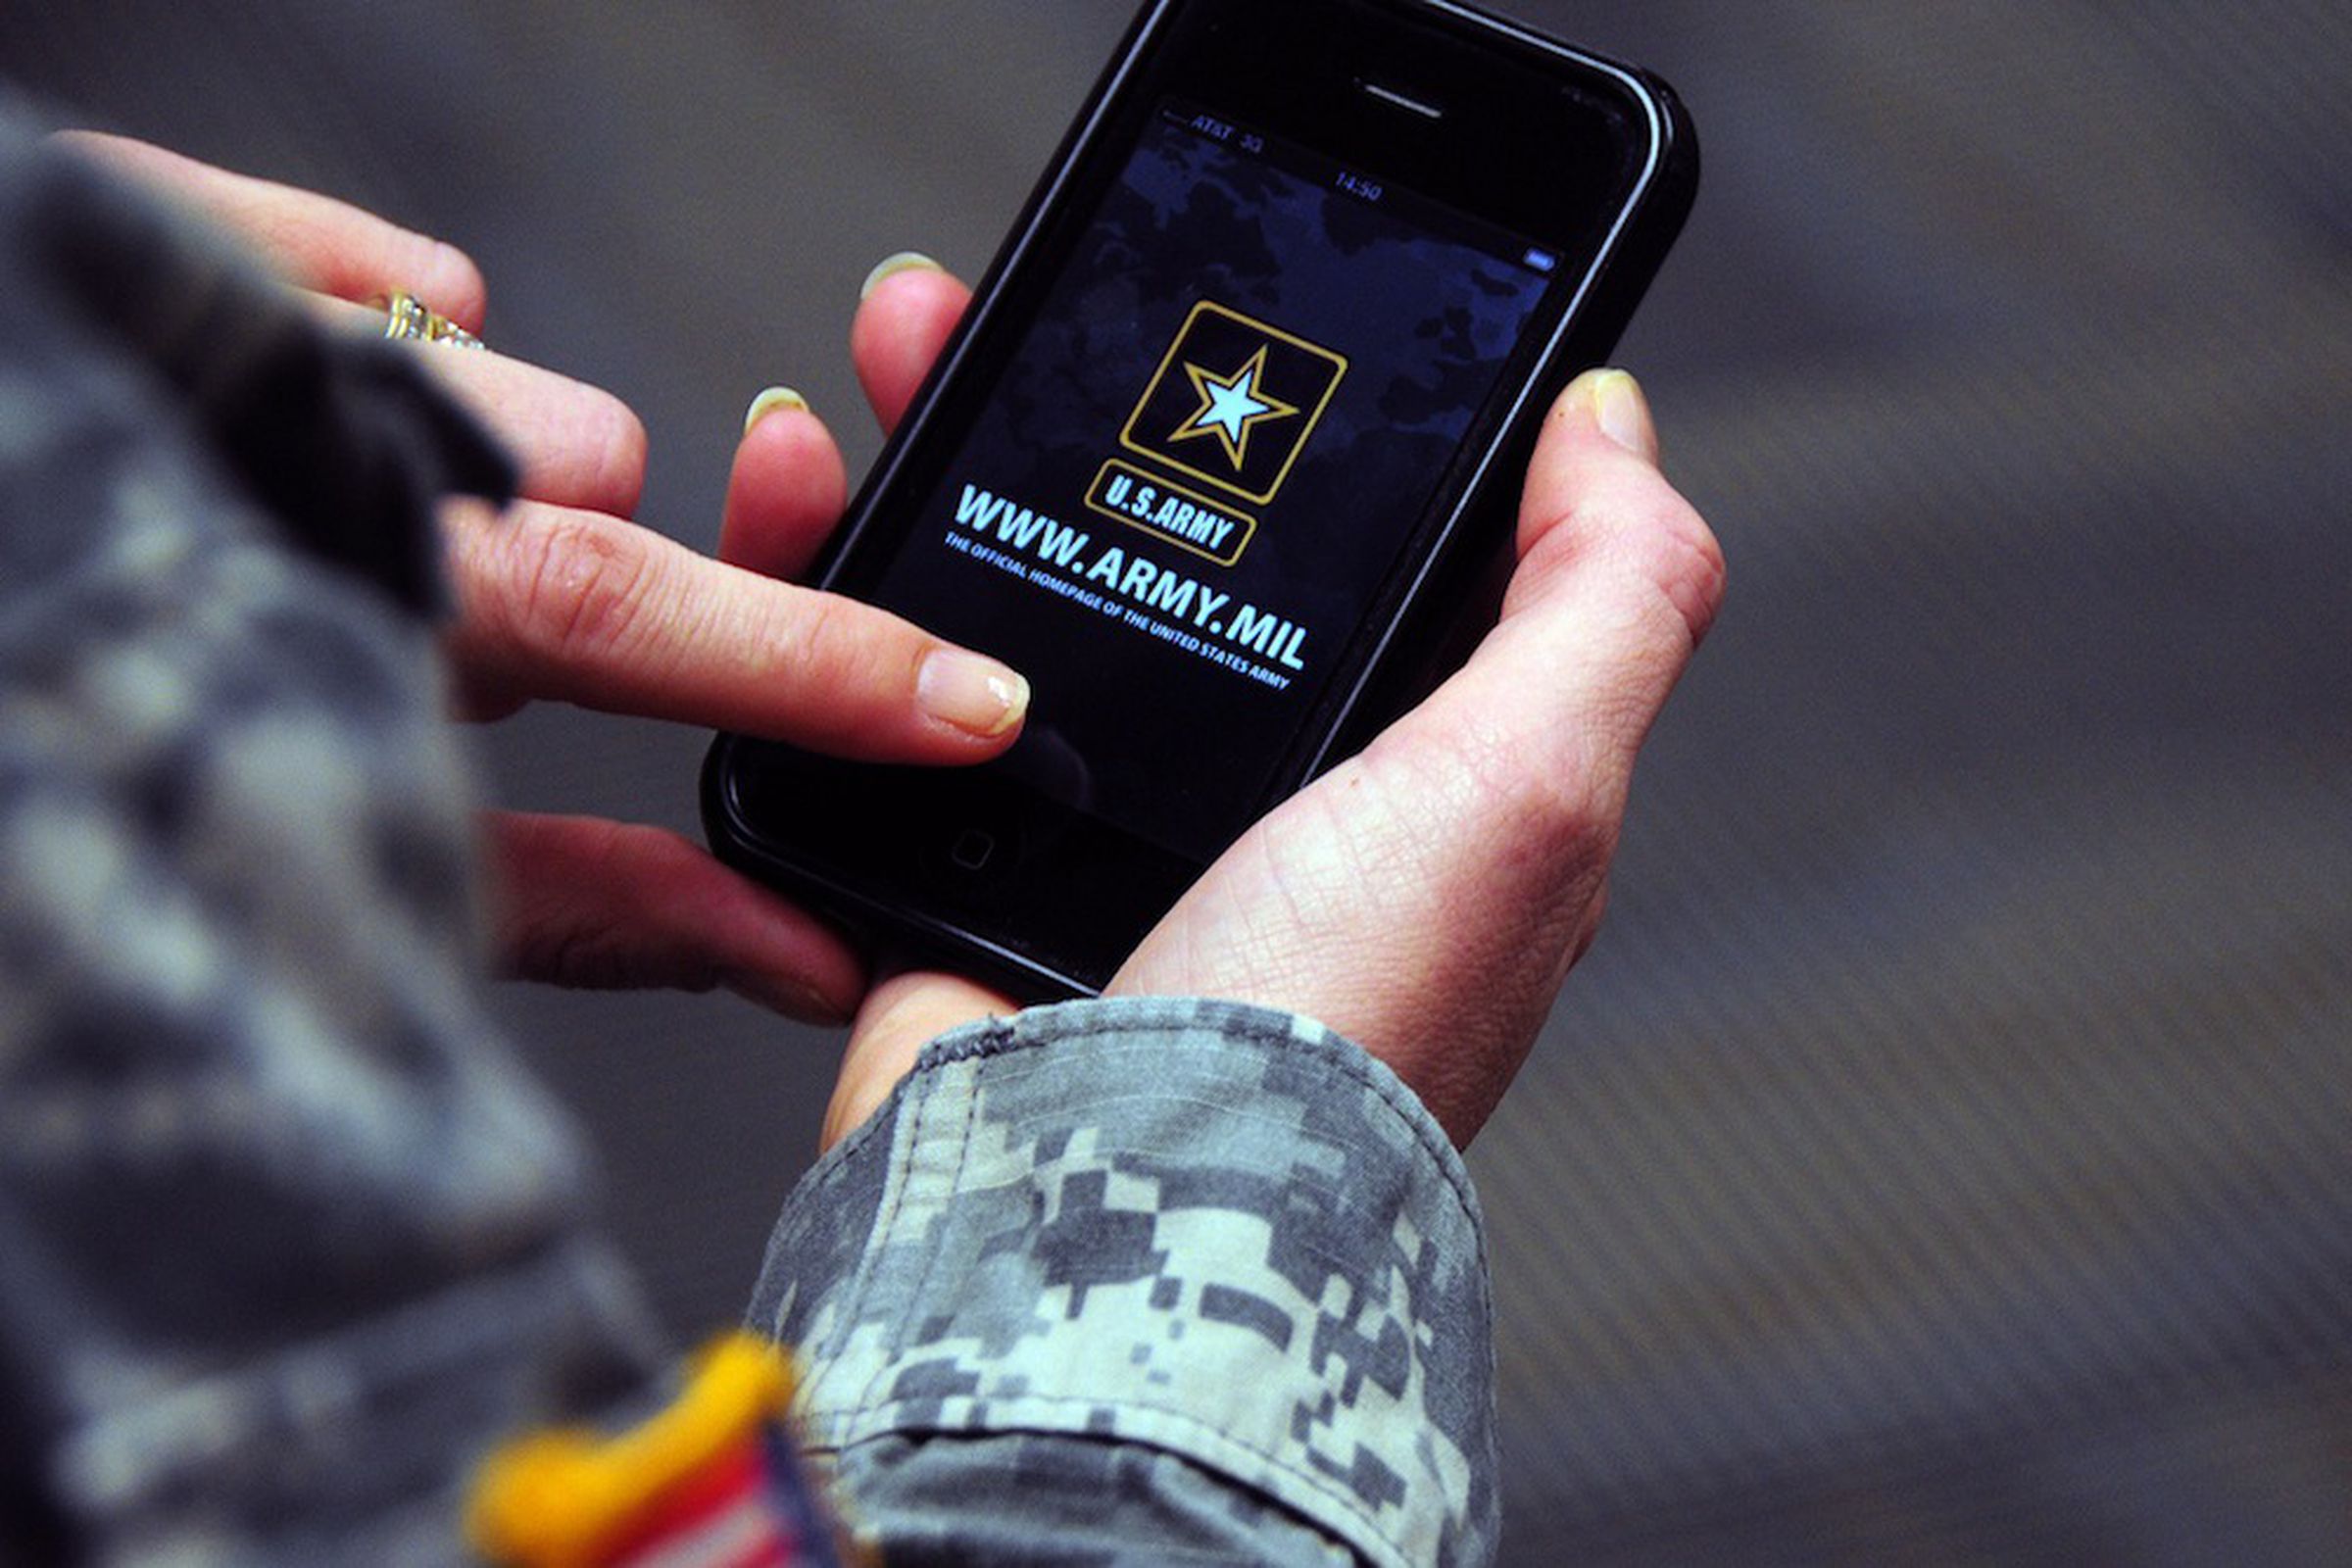 Army iPhone app (Credit: US Army Flickr) 